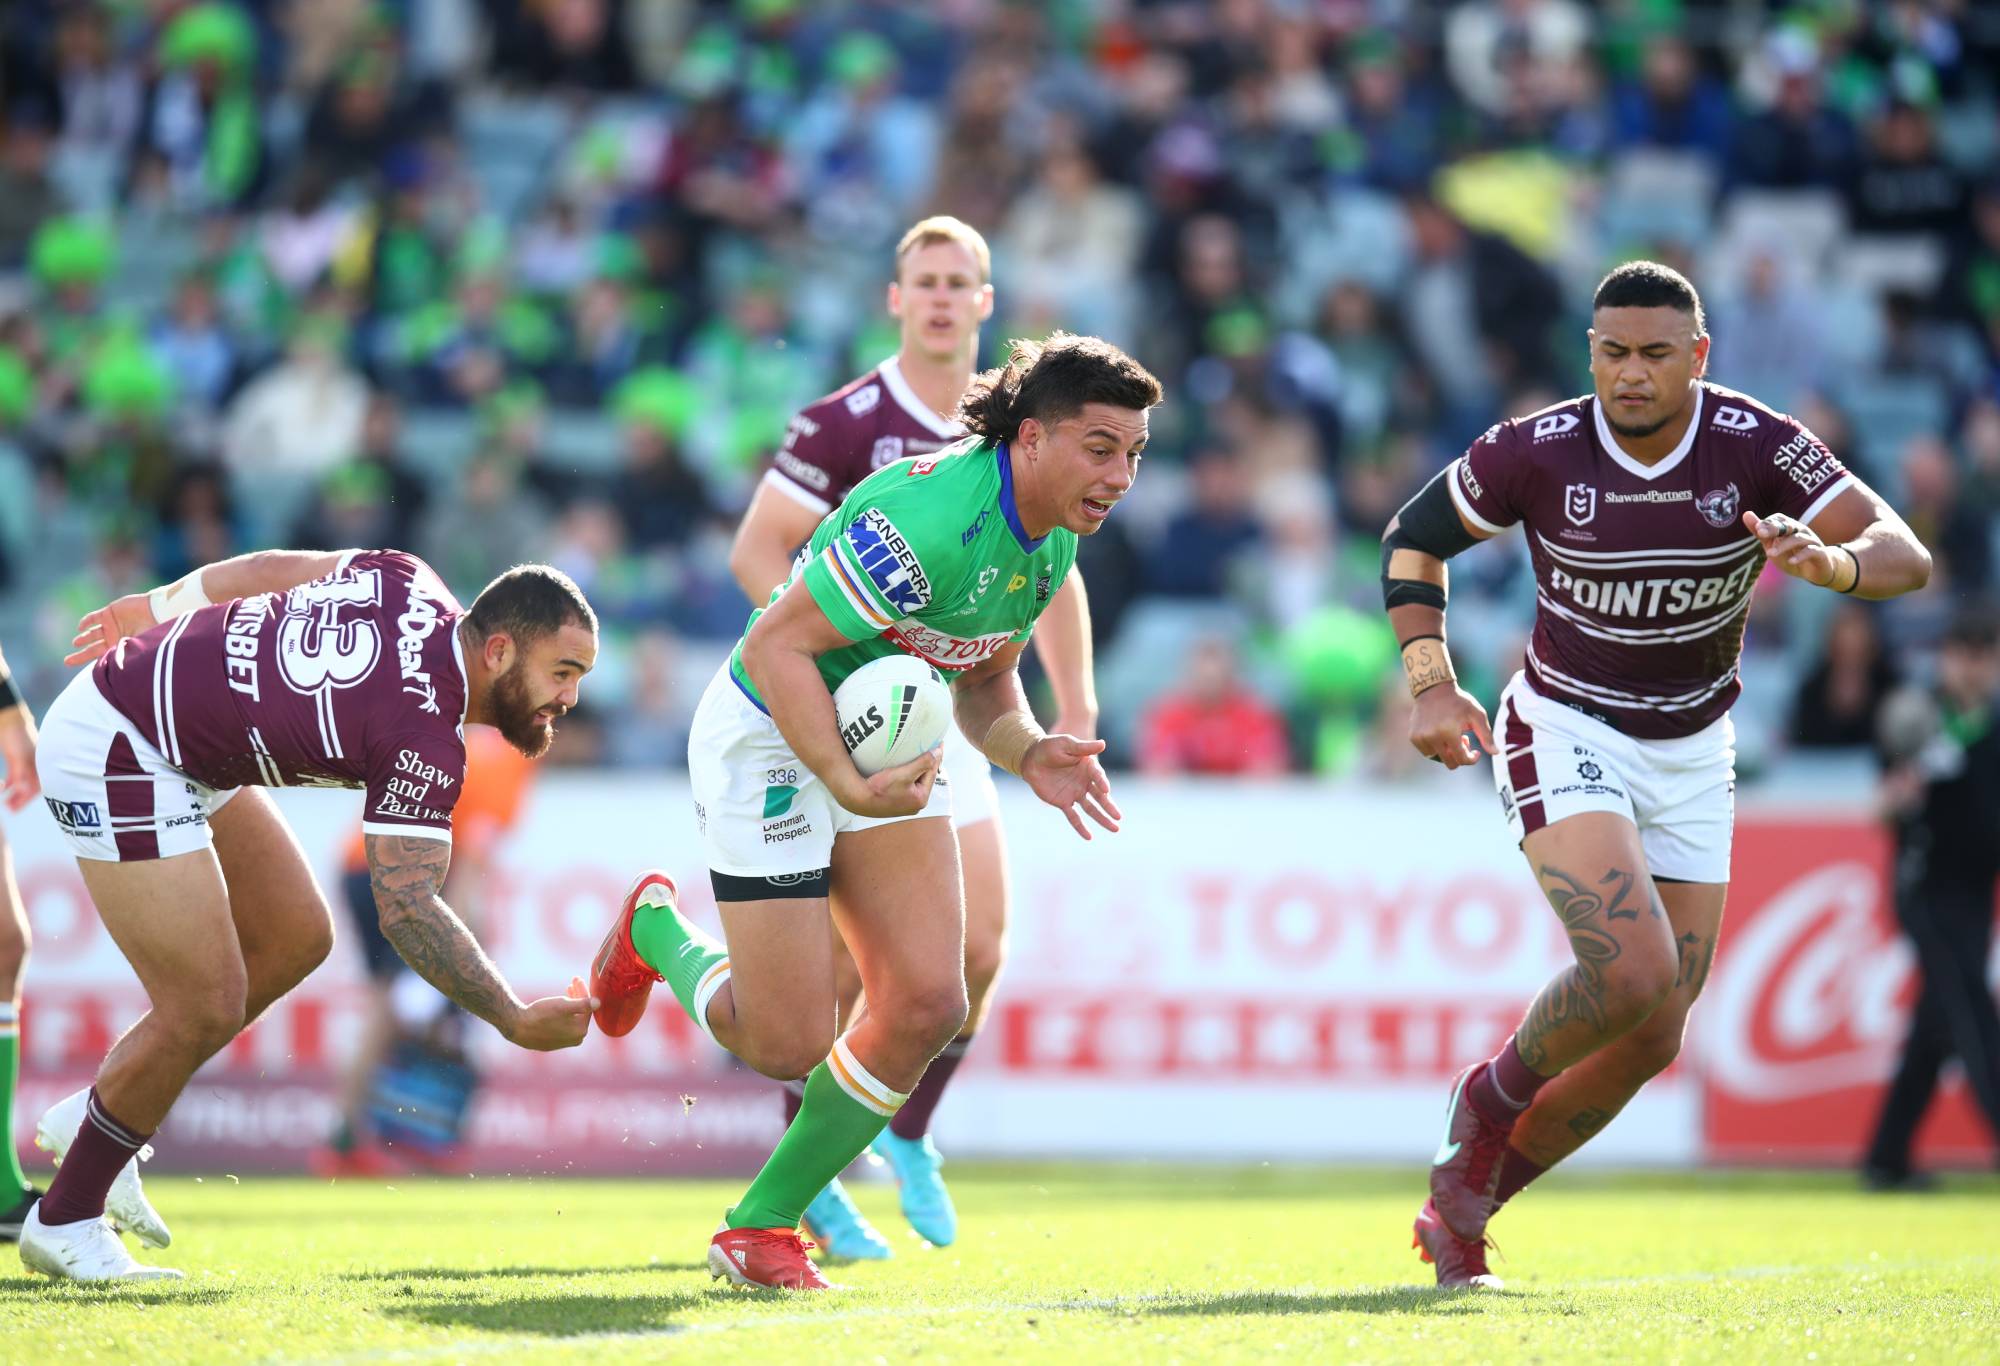 CANBERRA, AUSTRALIA - AUGUST 27: Joseph Tapine of the Raiders makes a break during the round 24 NRL match between the Canberra Raiders and the Manly Sea Eagles at GIO Stadium on August 27, 2022 in Canberra, Australia. (Photo by Jason McCawley/Getty Images)